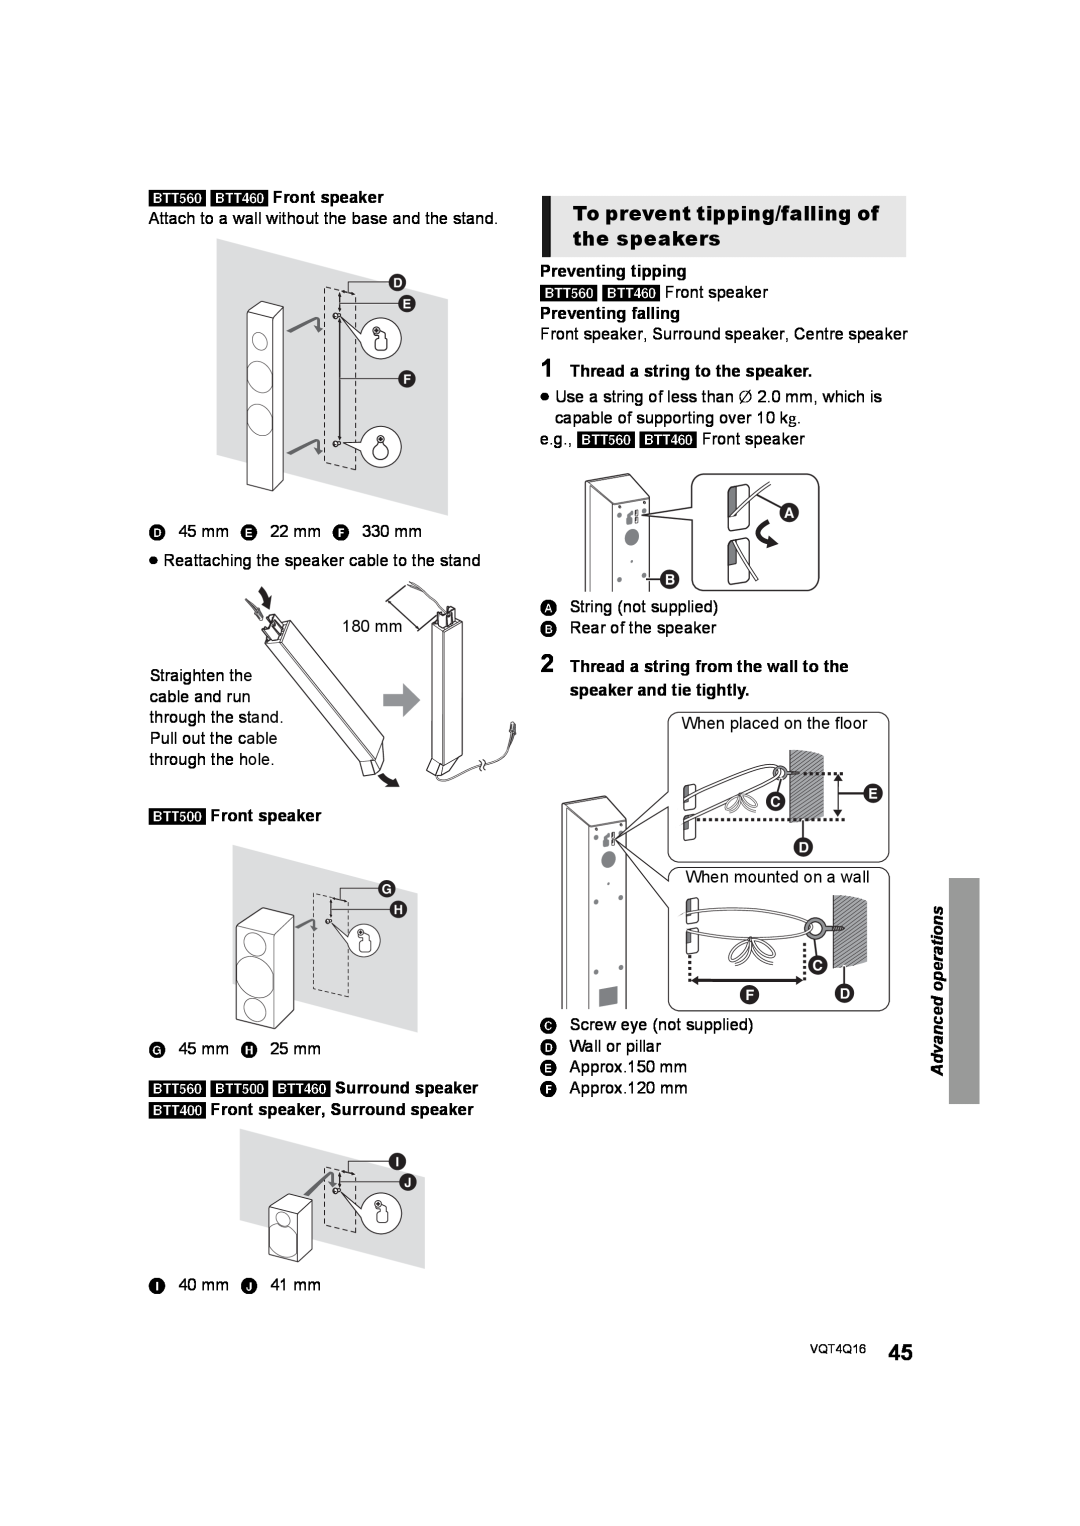 Panasonic SC-BTT560 SC-BTT500 SC-BTT460 SC-BTT400 manual To prevent tipping/falling of the speakers,  ,    